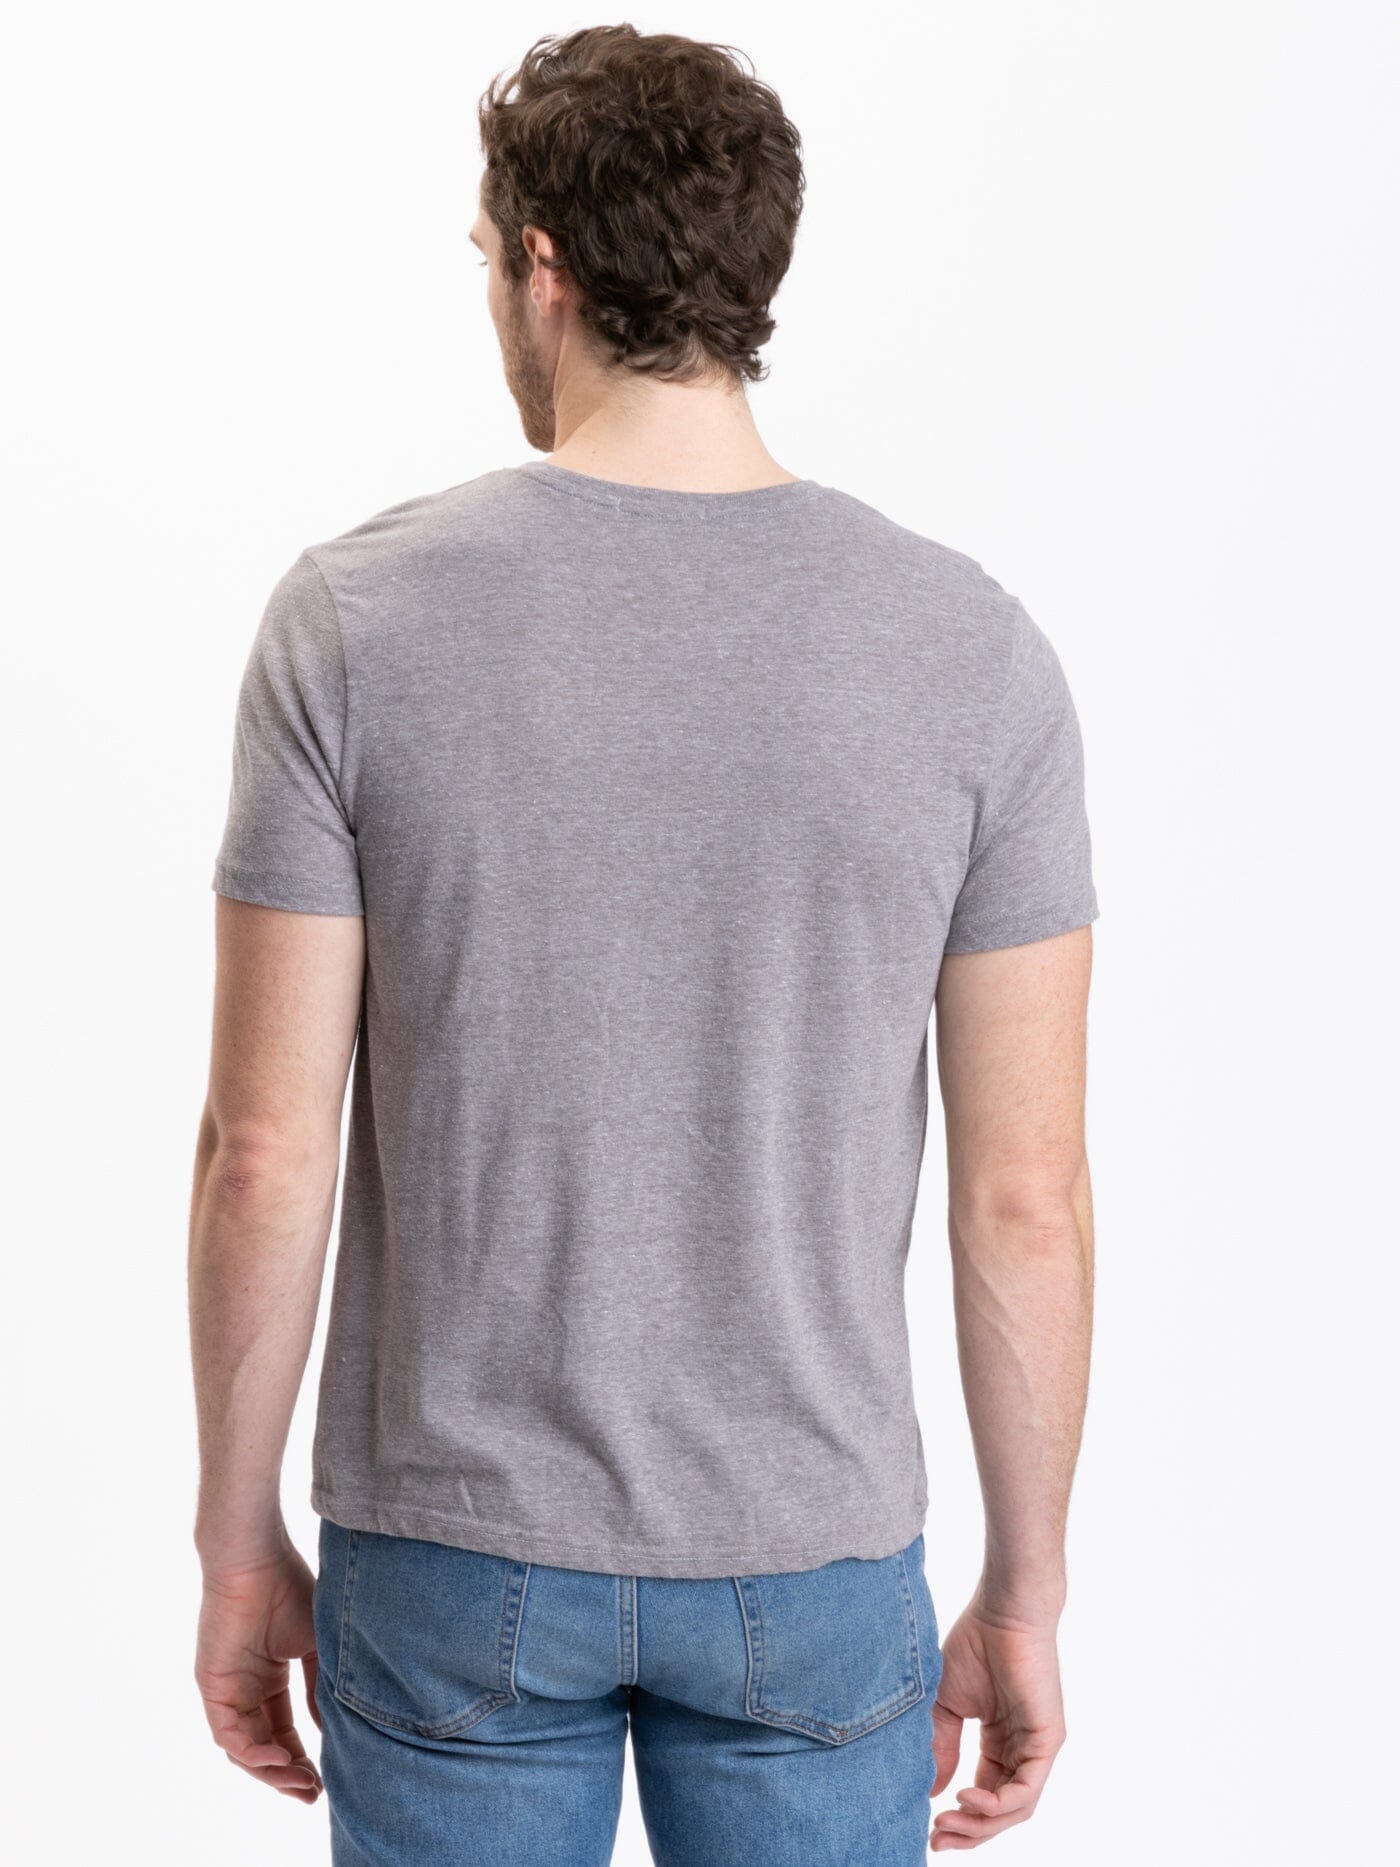 Triblend Crew Neck Tee in Threads Grey Heather 4 – Thought